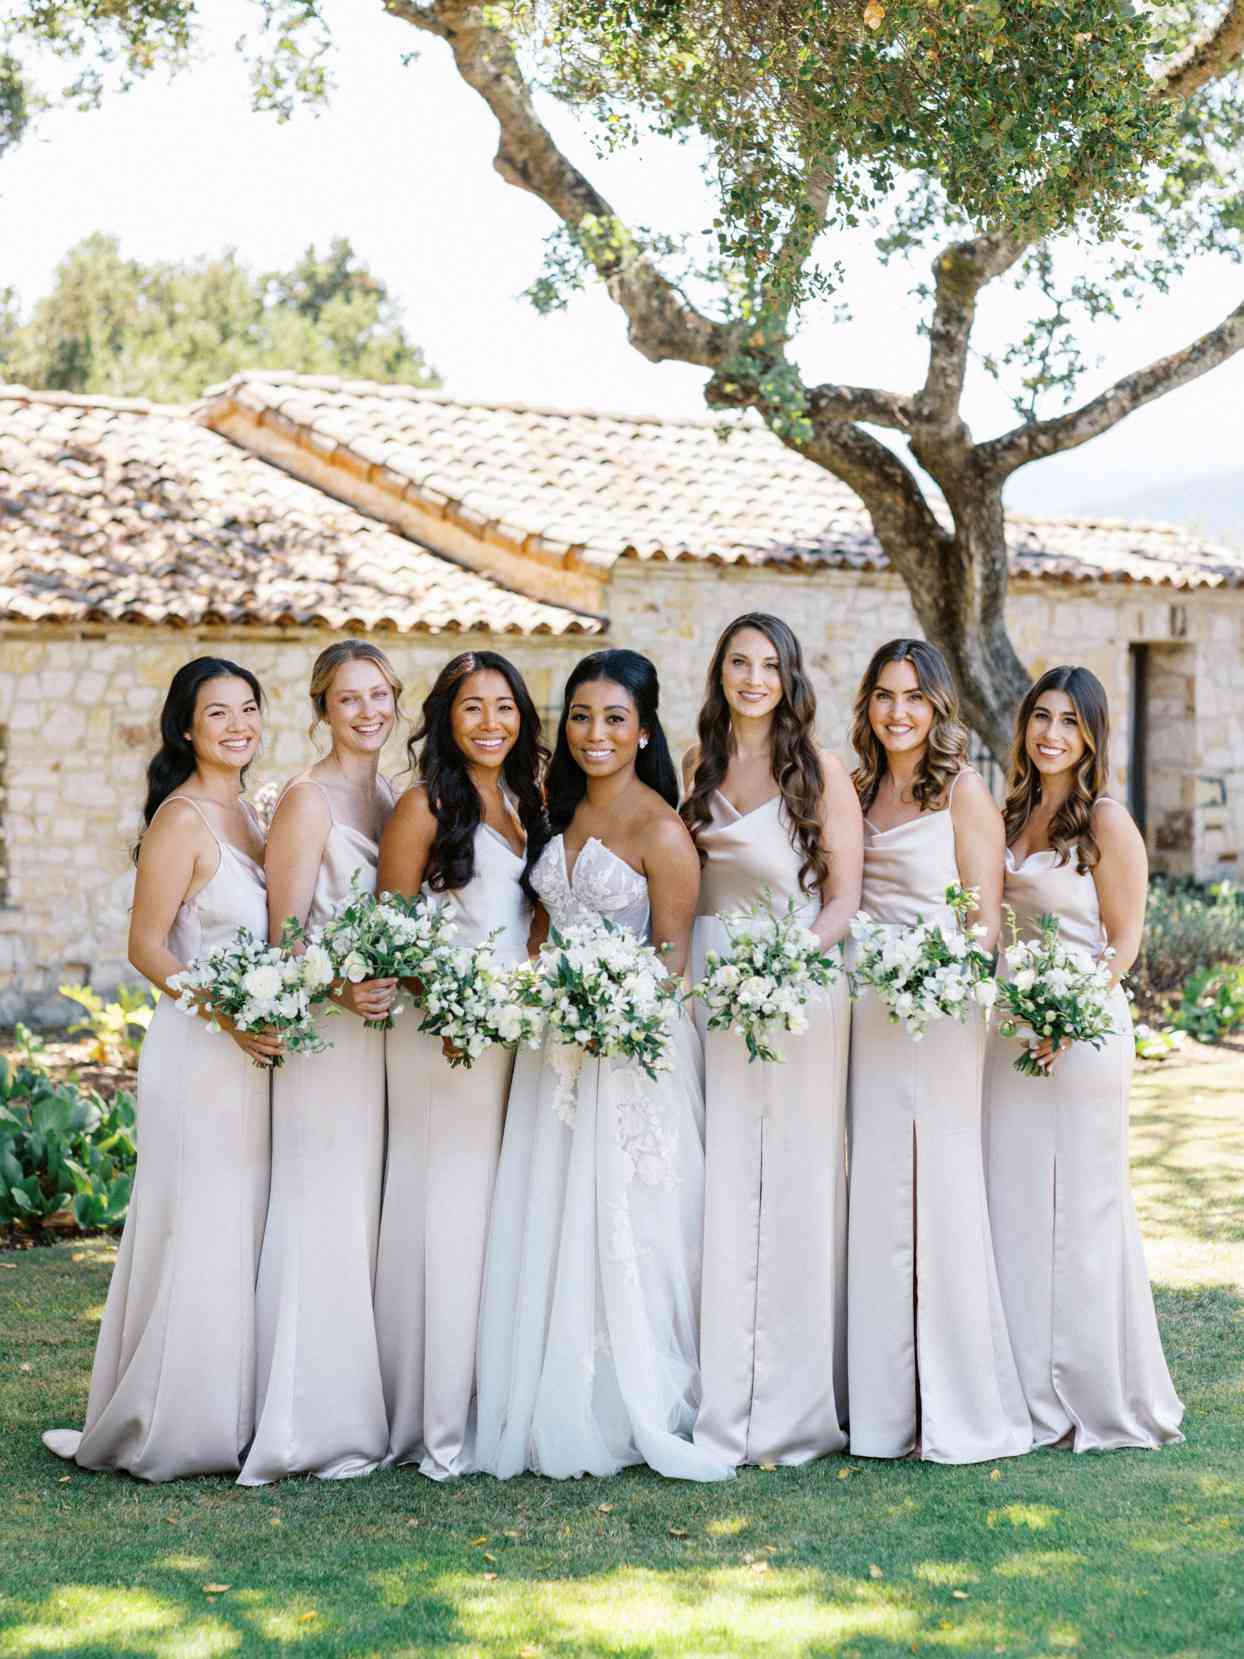 bride with bridesmaids in champagne slip dresses from Amsale paired with nude shoes